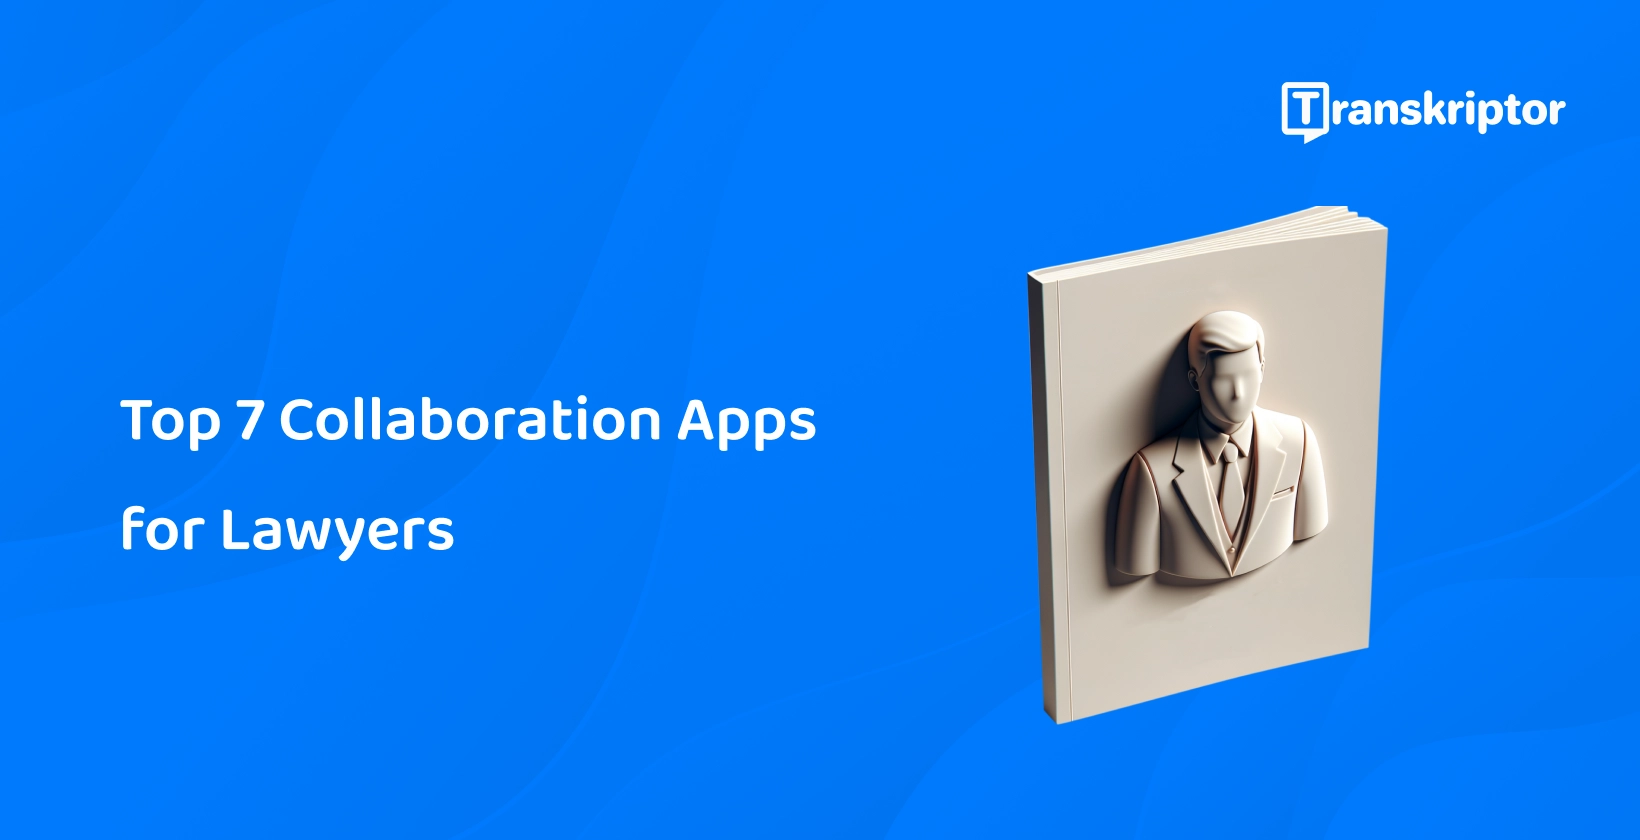 Lawyer figurine on a digital book represents the top collaboration apps.